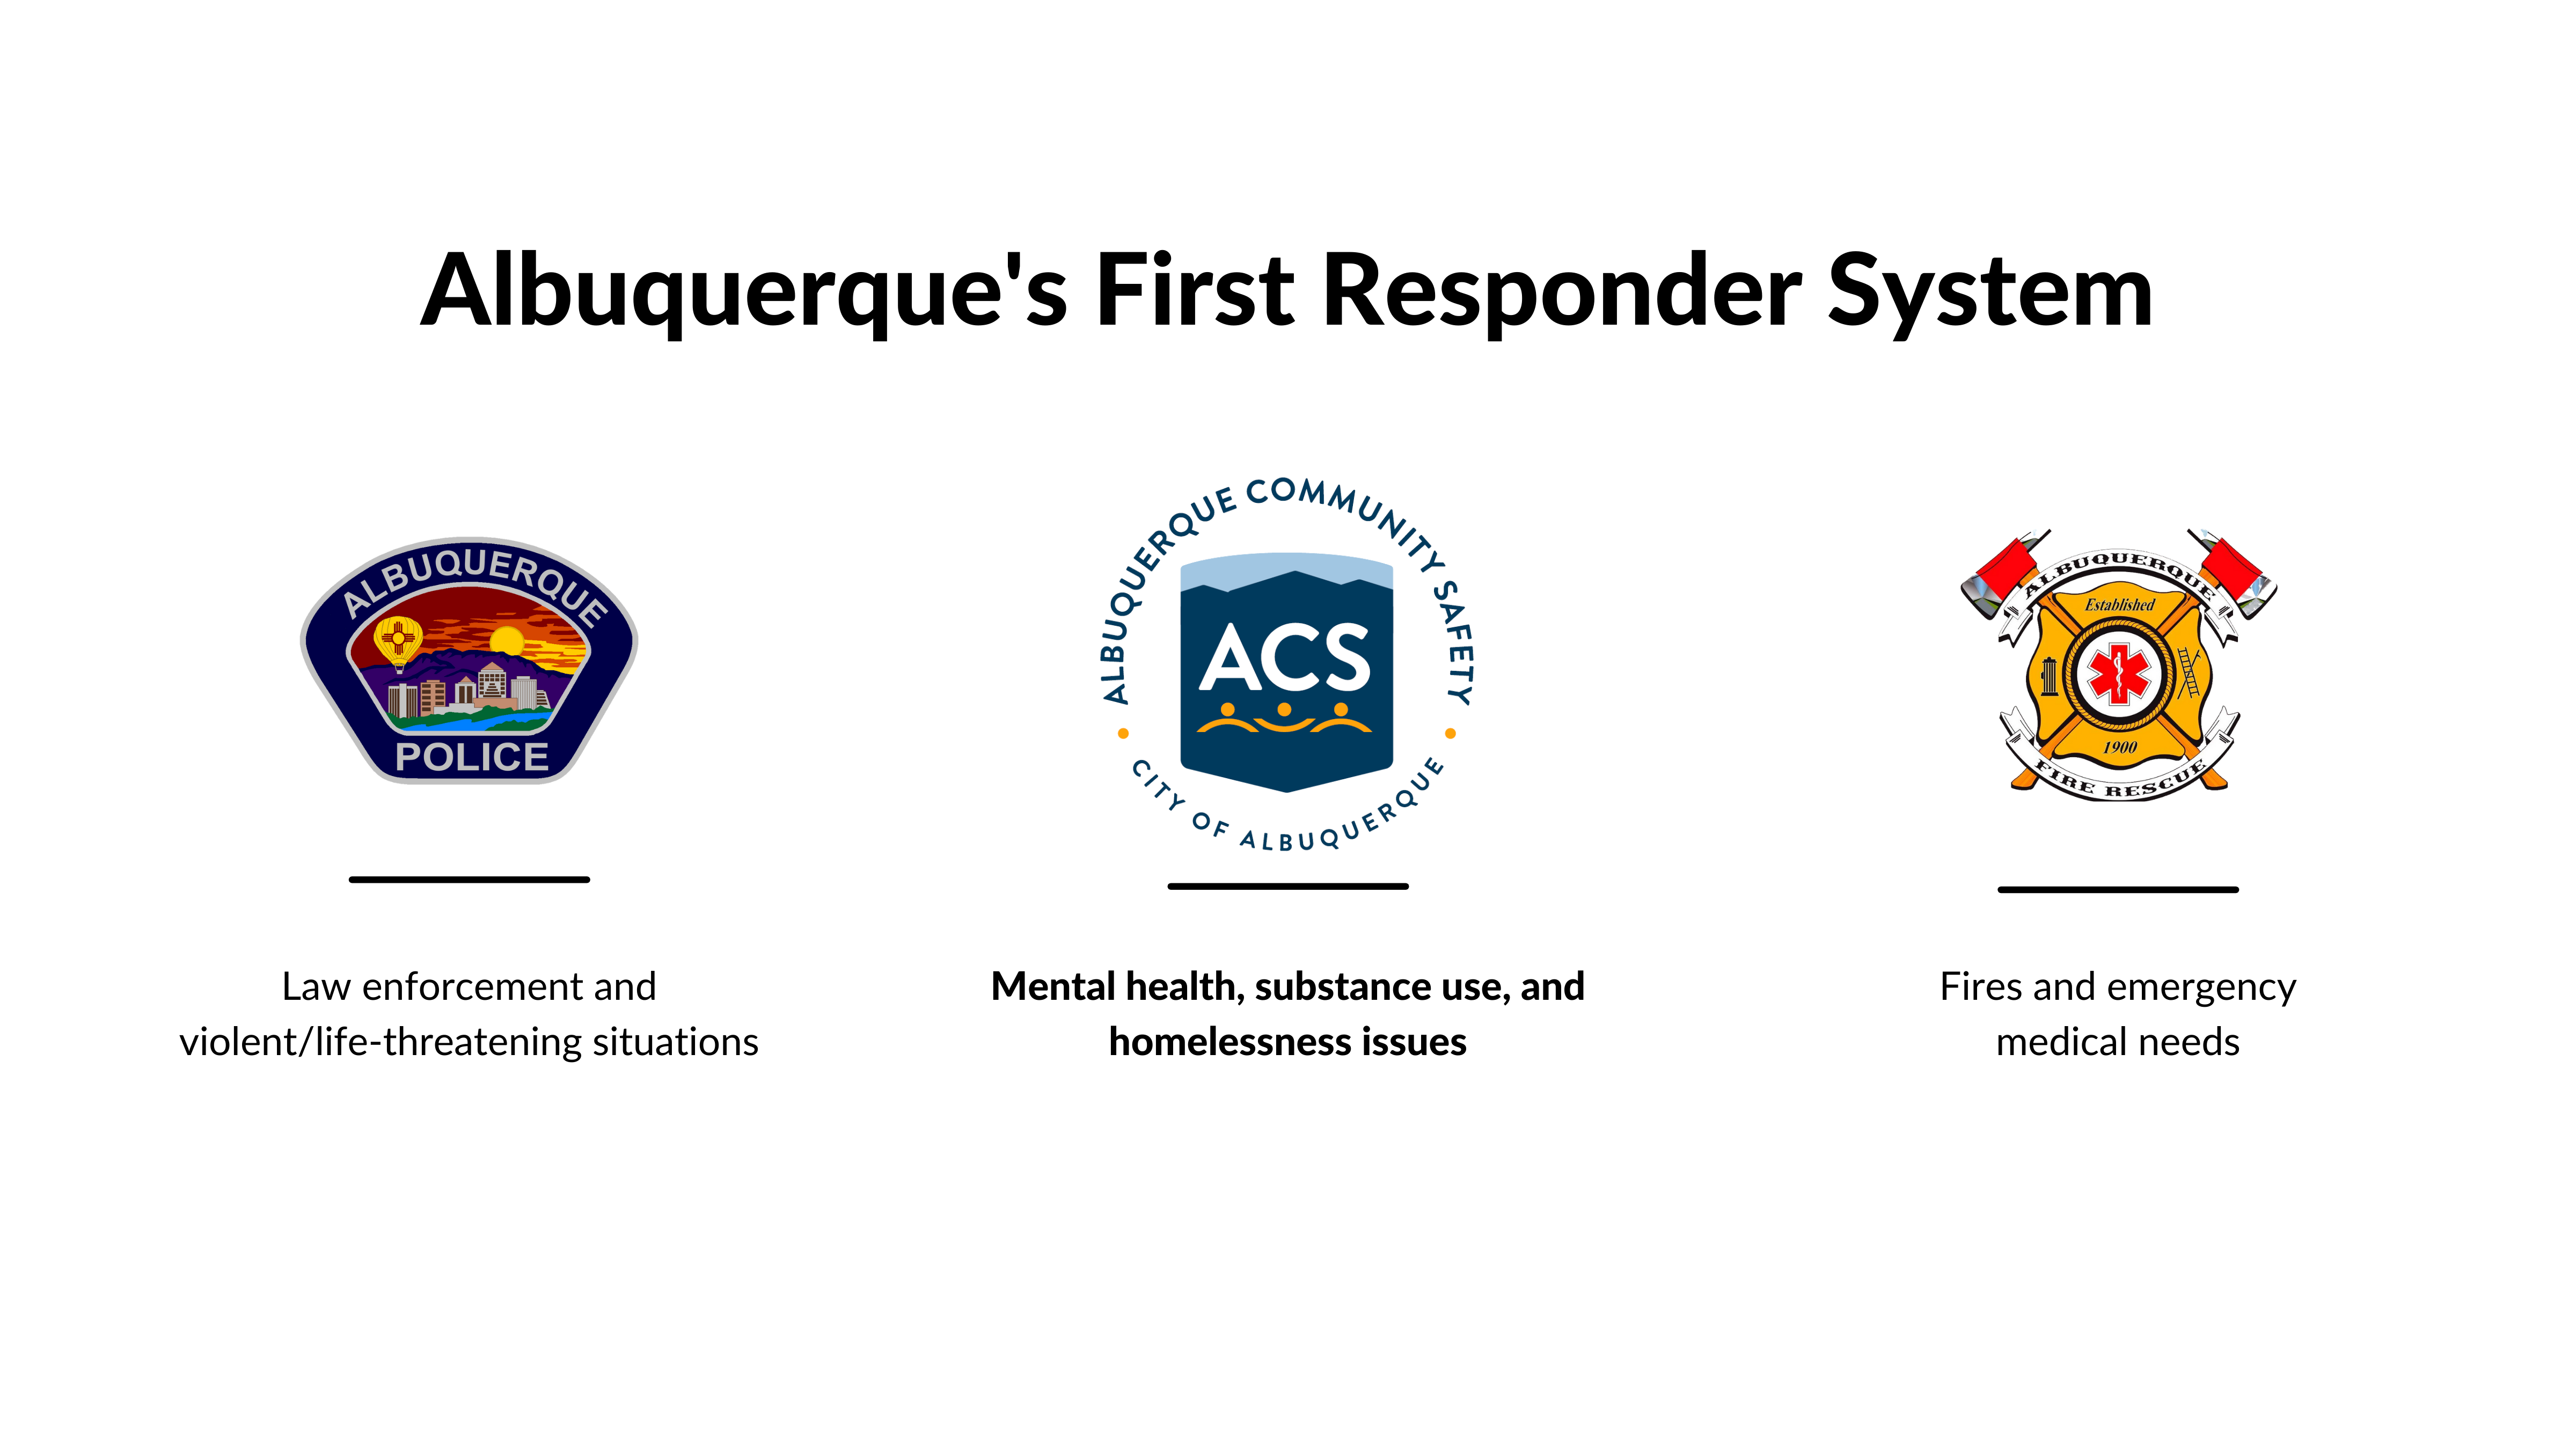 The logos of APD, ACS, and AFR with descriptions of the role that each plays in Albuquerque's First Responder System